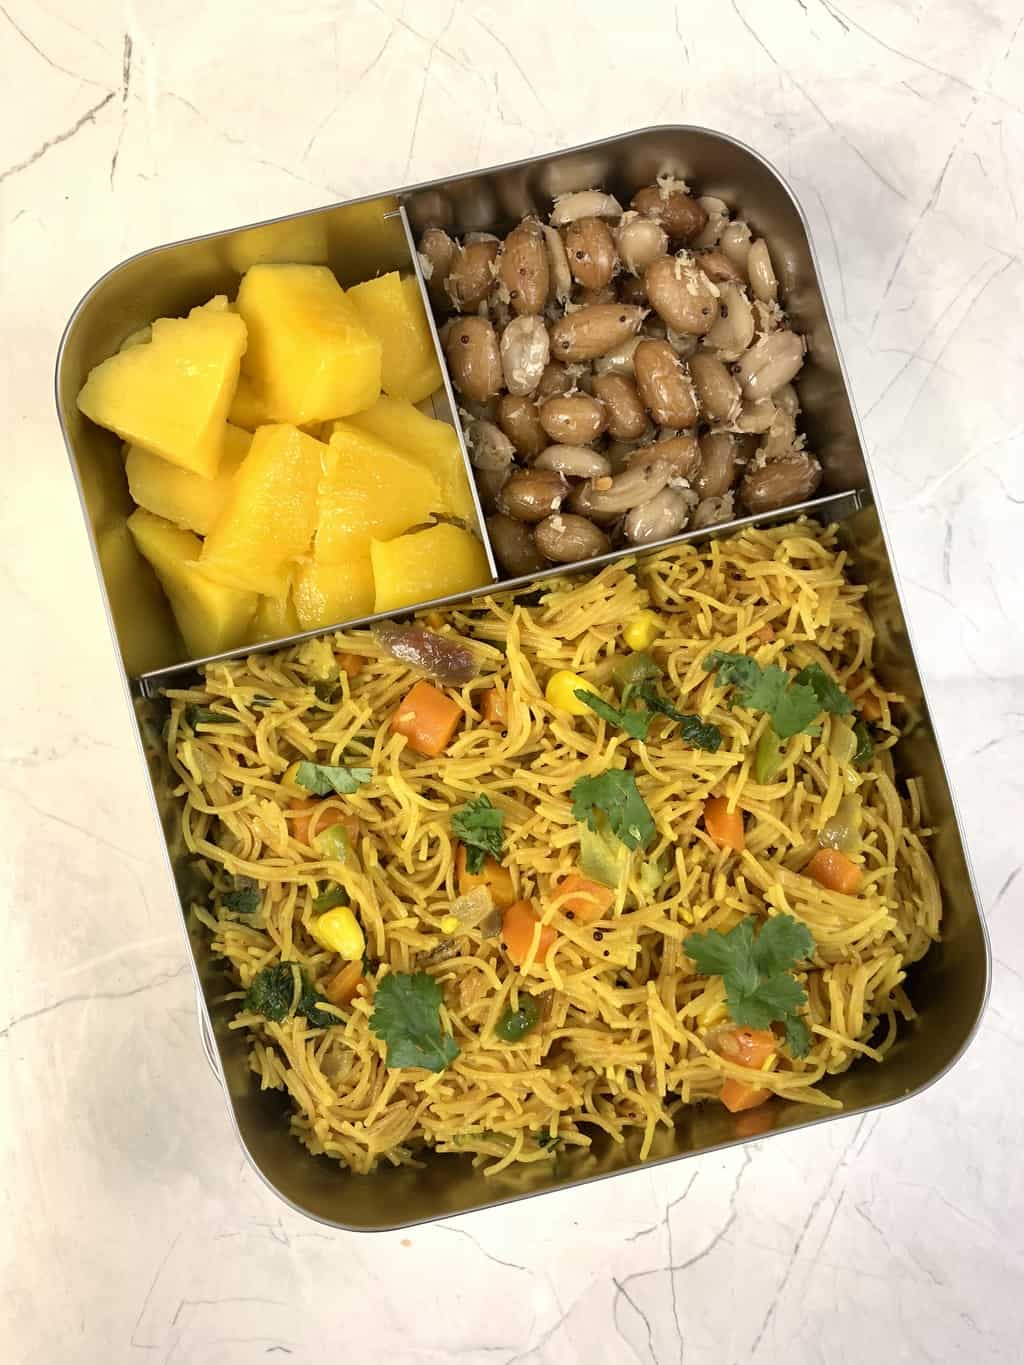 Veg Vermicelli Upma + Peanut Sundal + Mango|It makes for a good breakfast or a packed lunch box for both kids and adults|indianveggiedelight.com